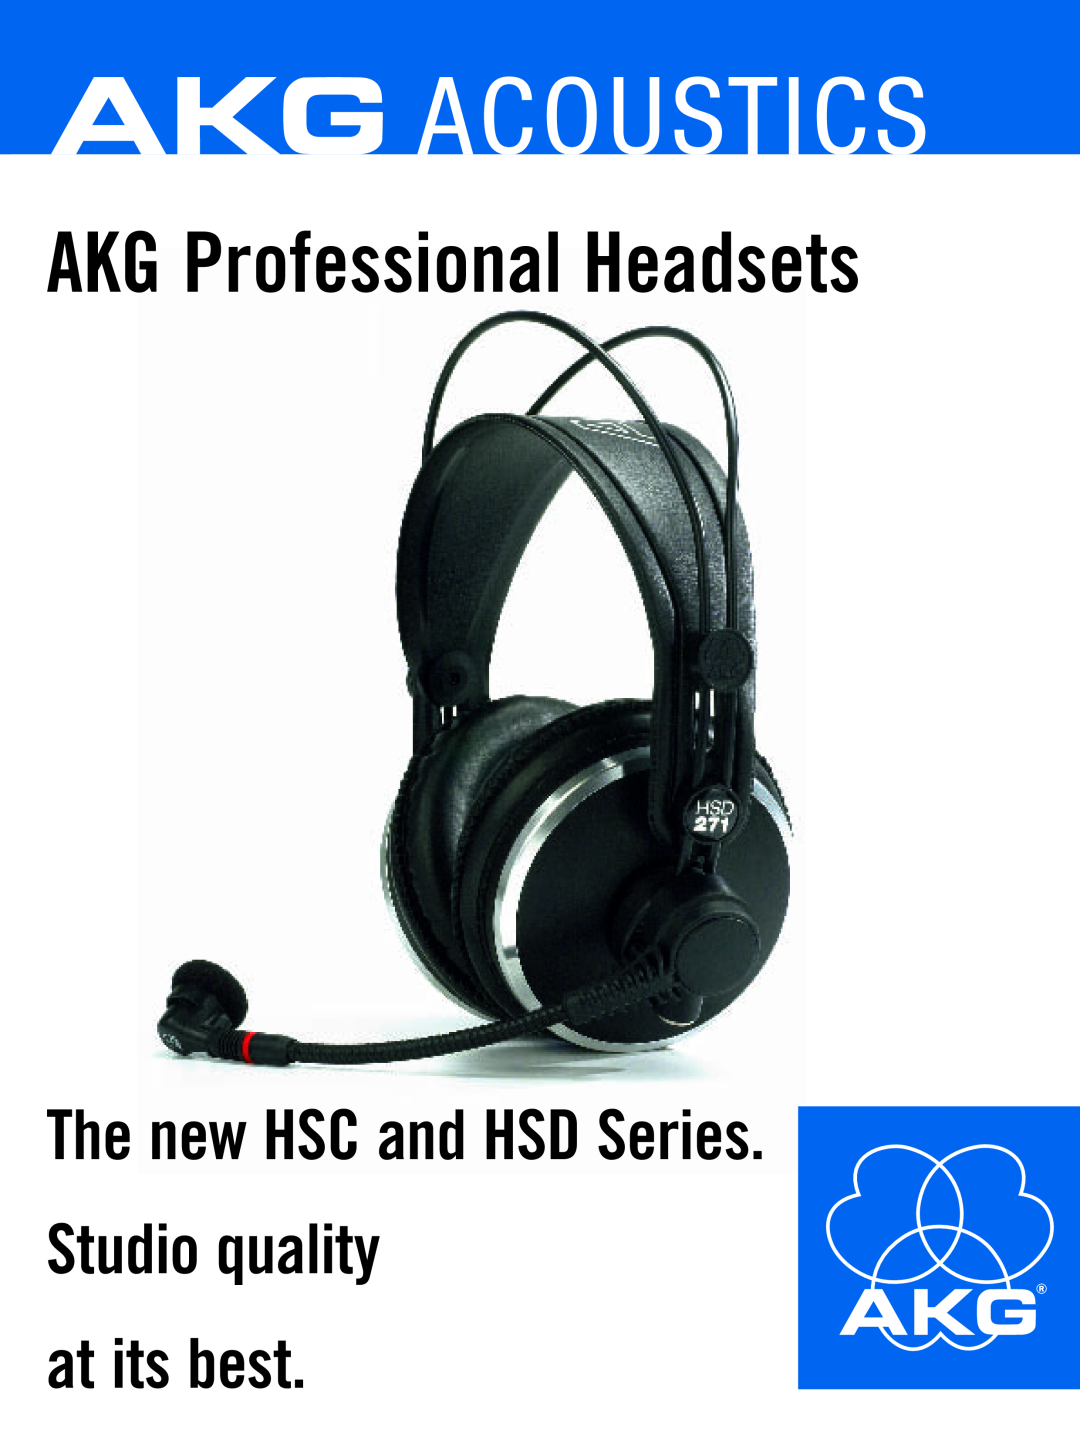 AKG Acoustics HSC Series manual AKG Professional Headsets, The new HSC and HSD Series Studio quality, at its best 